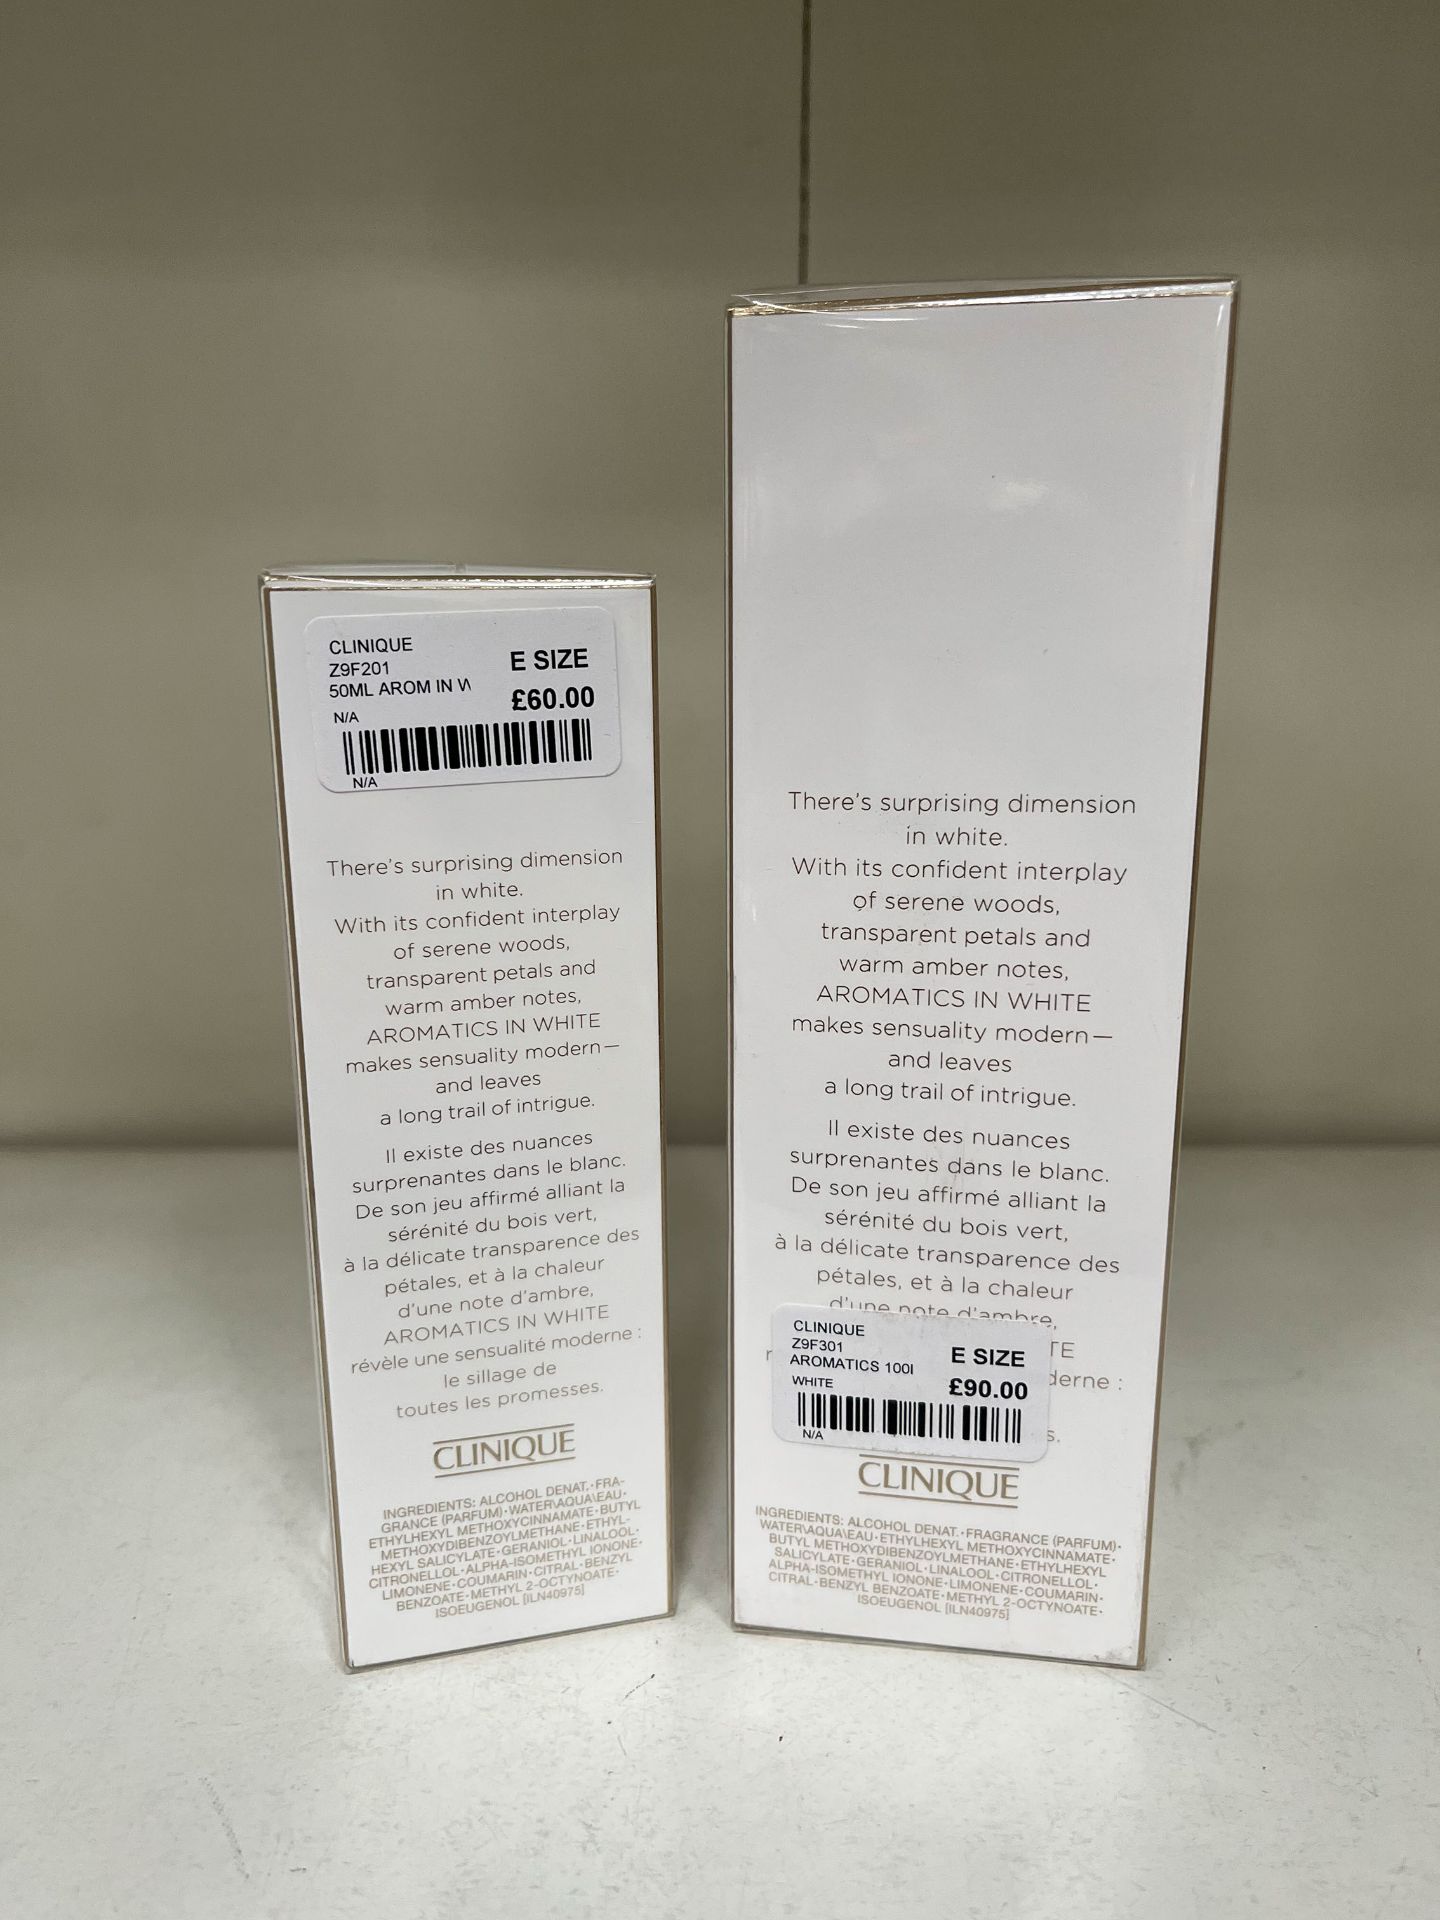 2x Clinique Aromatic in White Perfumes - Image 2 of 2